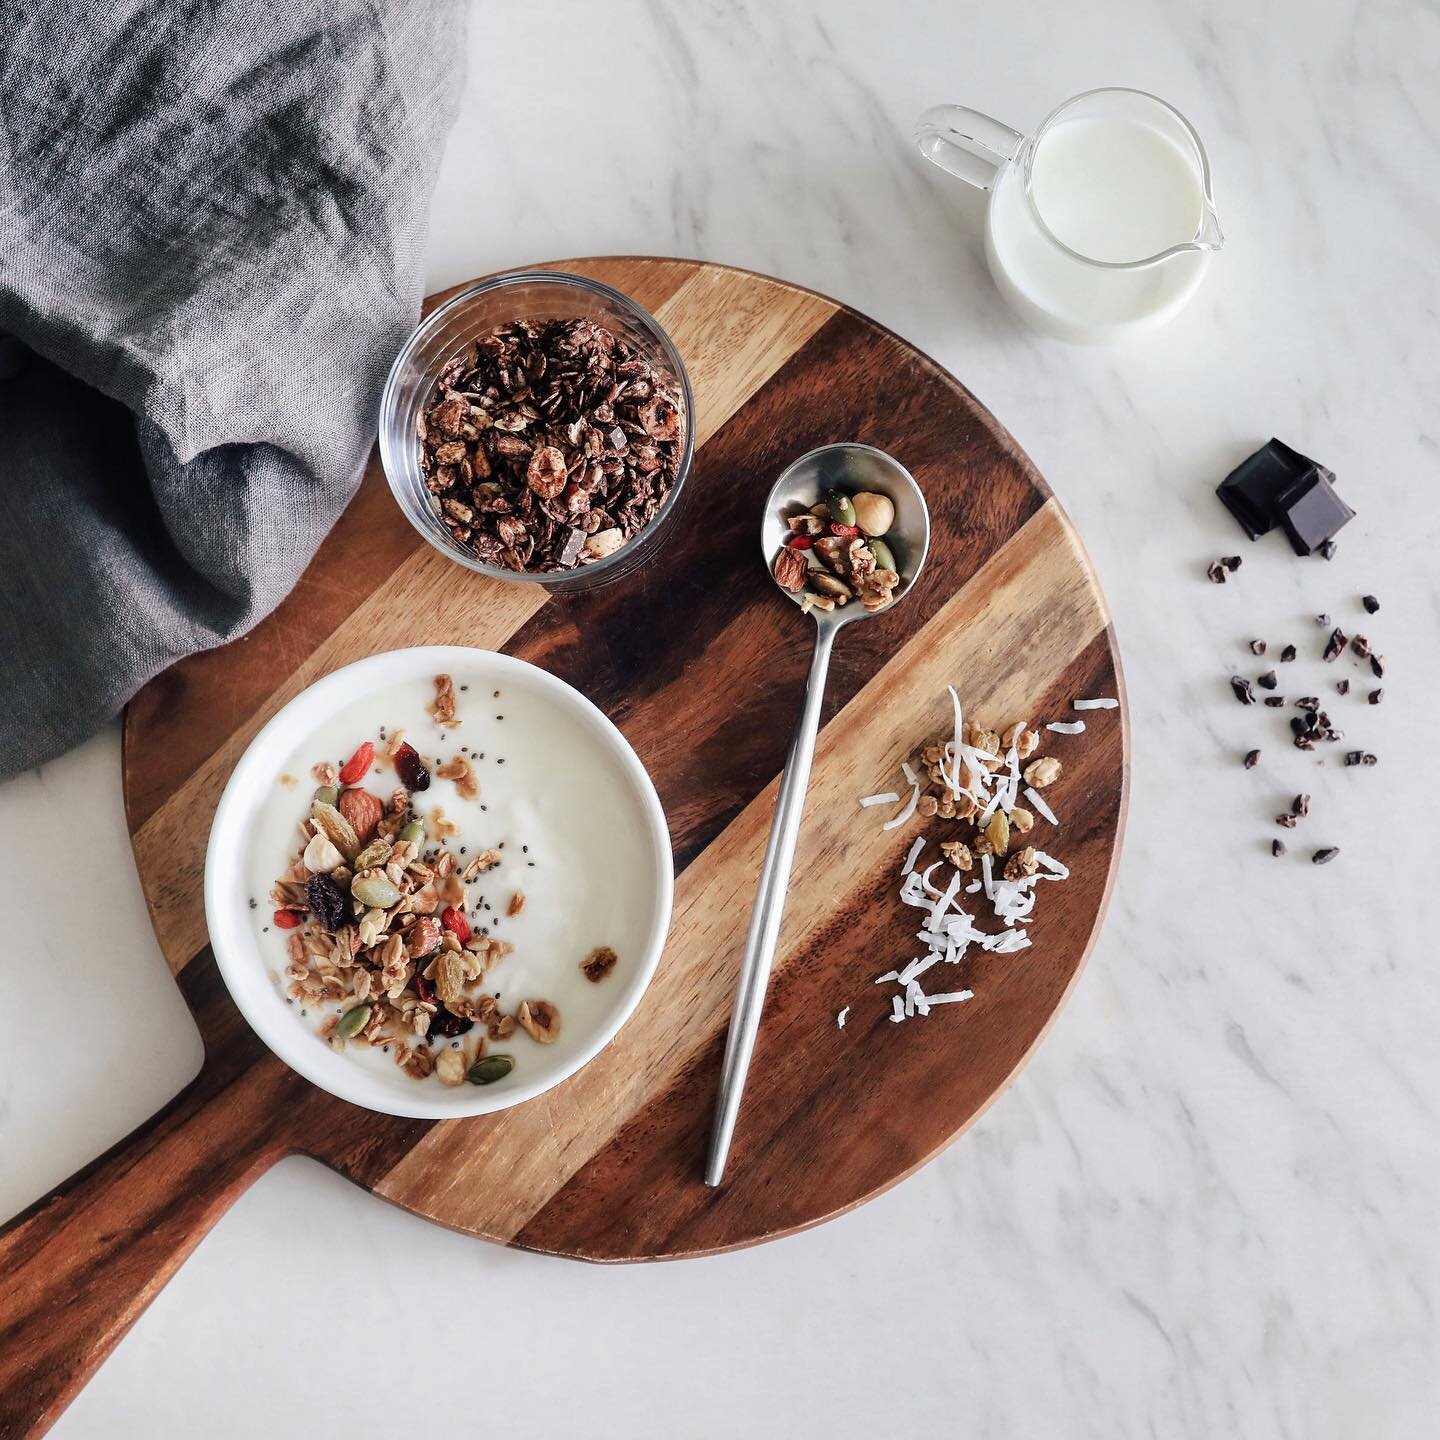 We&rsquo;re not gonna tell you we make the world&rsquo;s best granola (but if you do think so, we&rsquo;d be extremely flattered). 

What we can tell you is that a lot of care and time goes behind each bag of granola - from hand chopping the nuts and